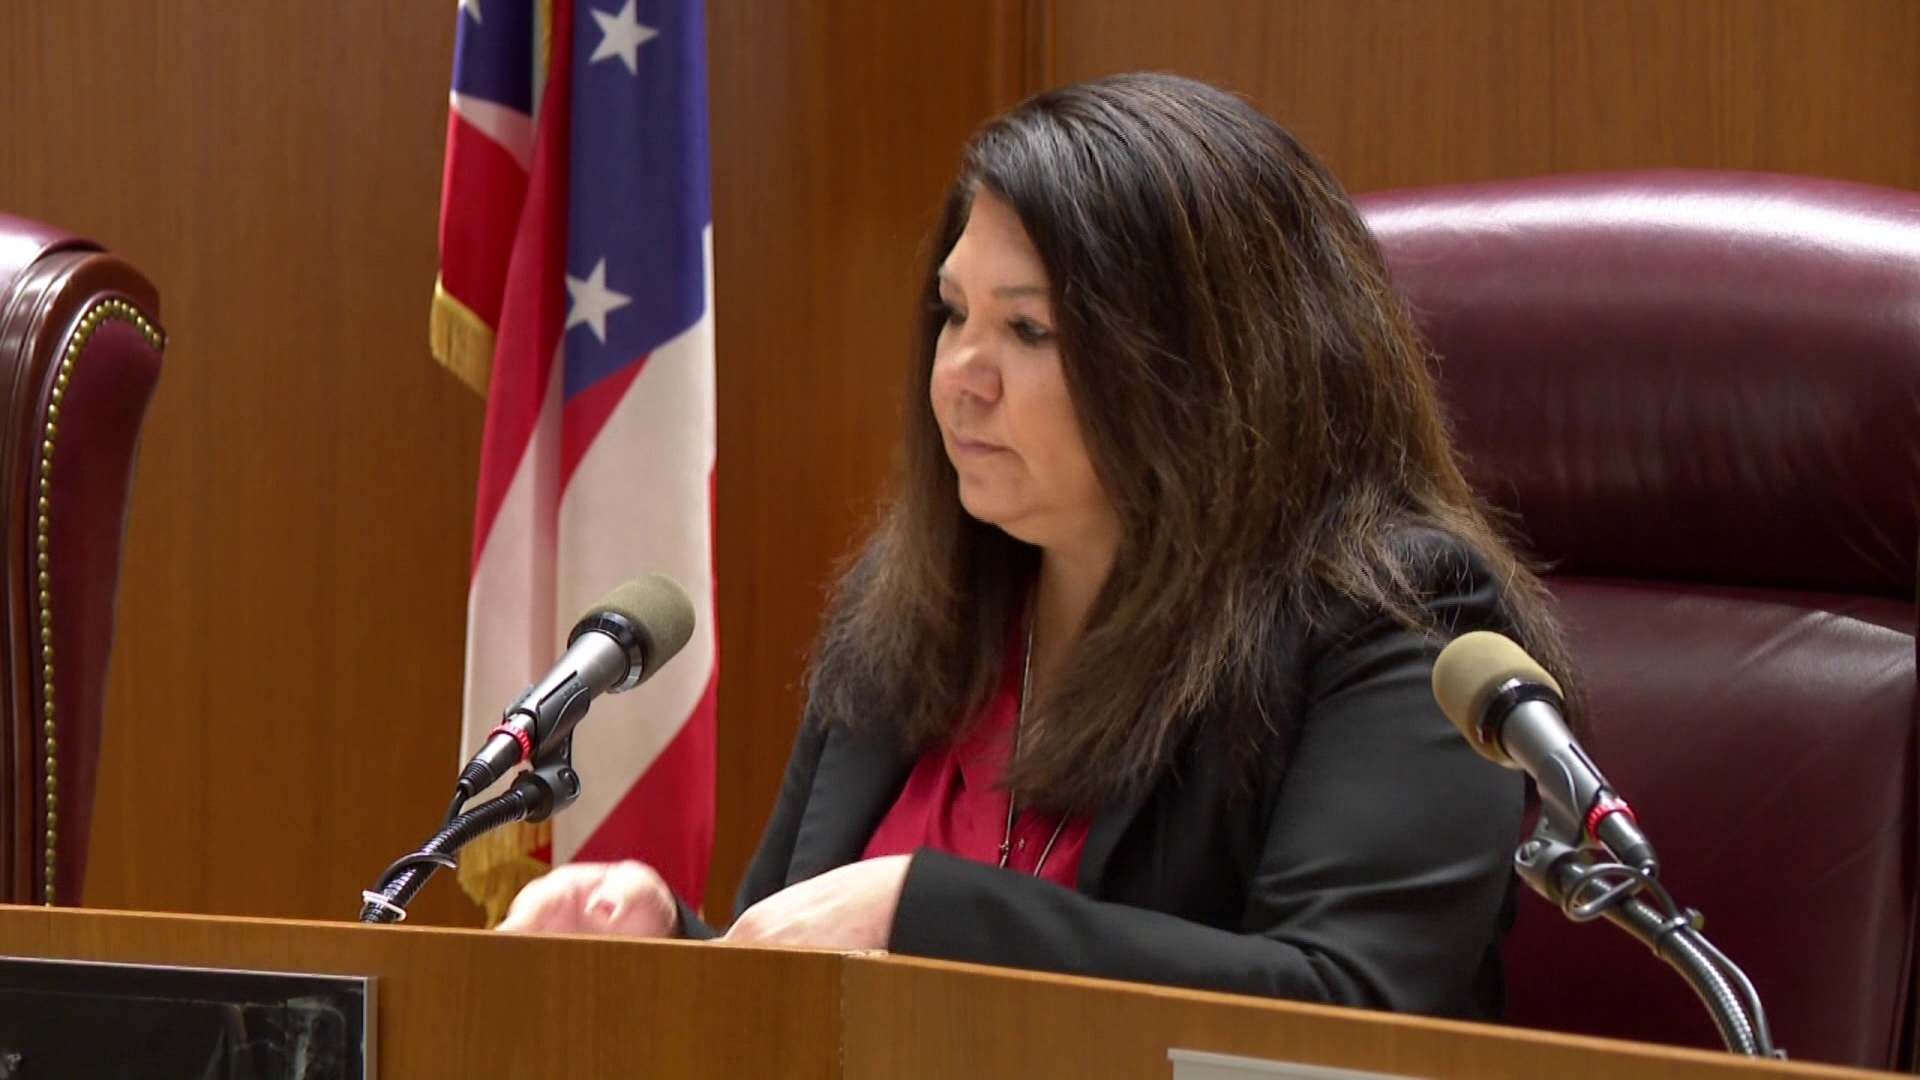 Anita Lopez will be required to undergo training in appropriate workplace behavior.